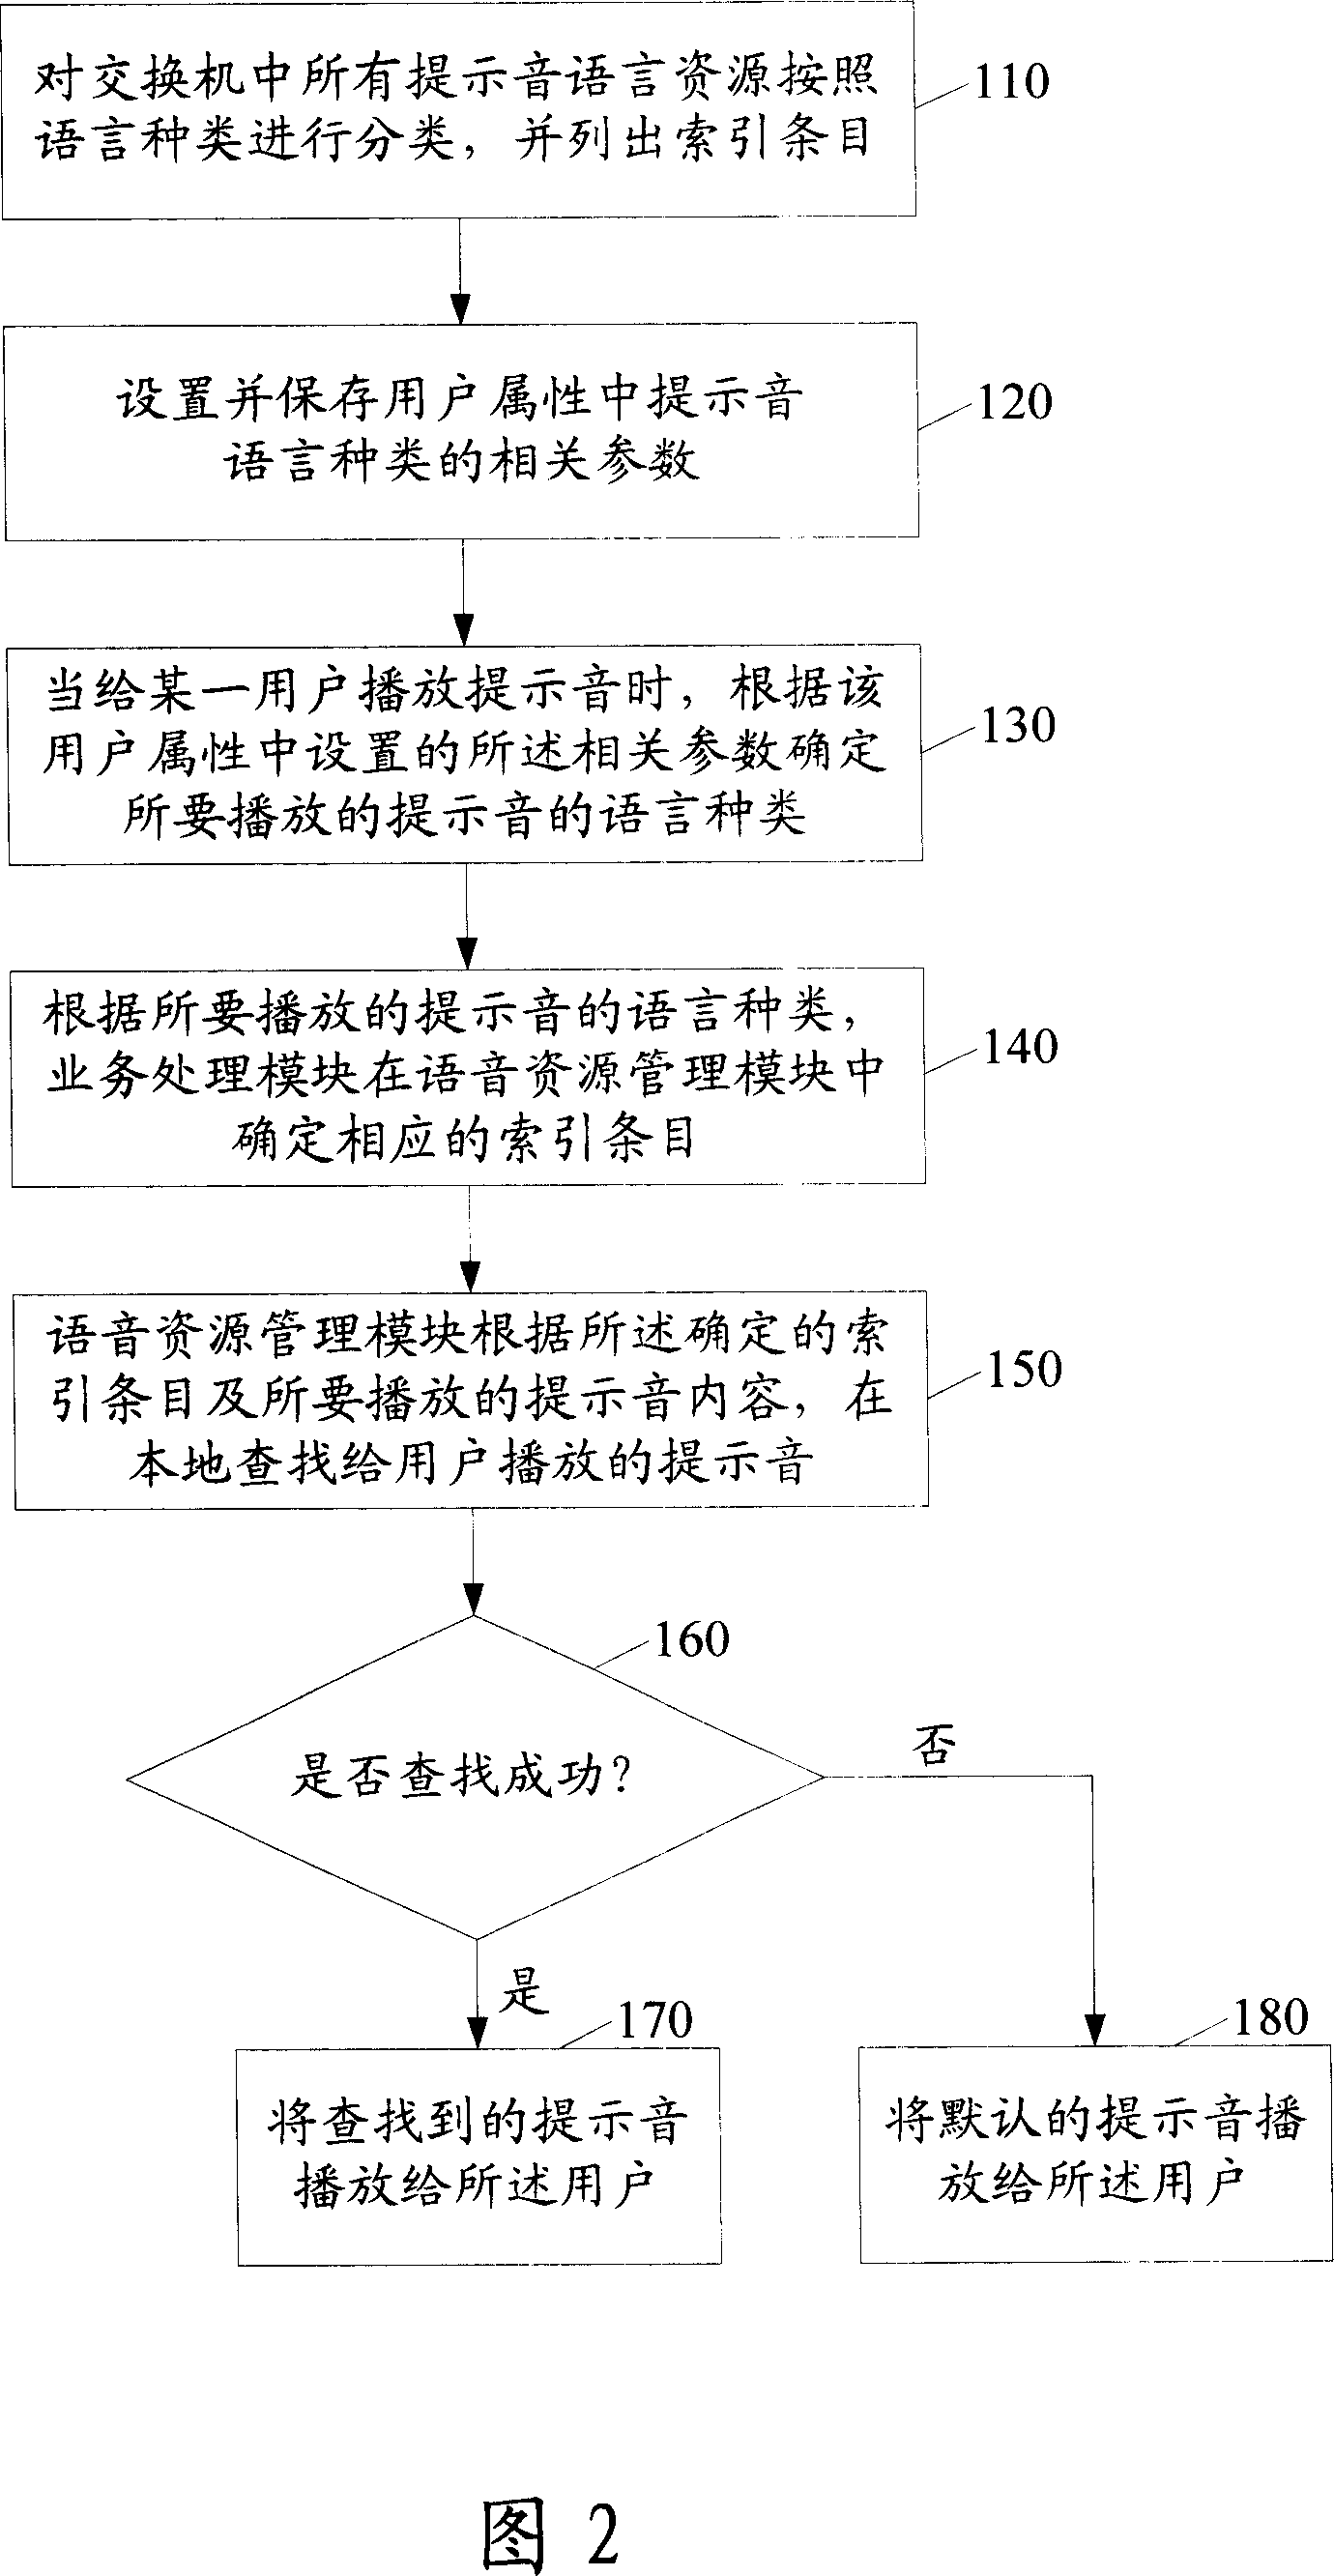 Method and system for customing prompt voice speech in digital program control exchange